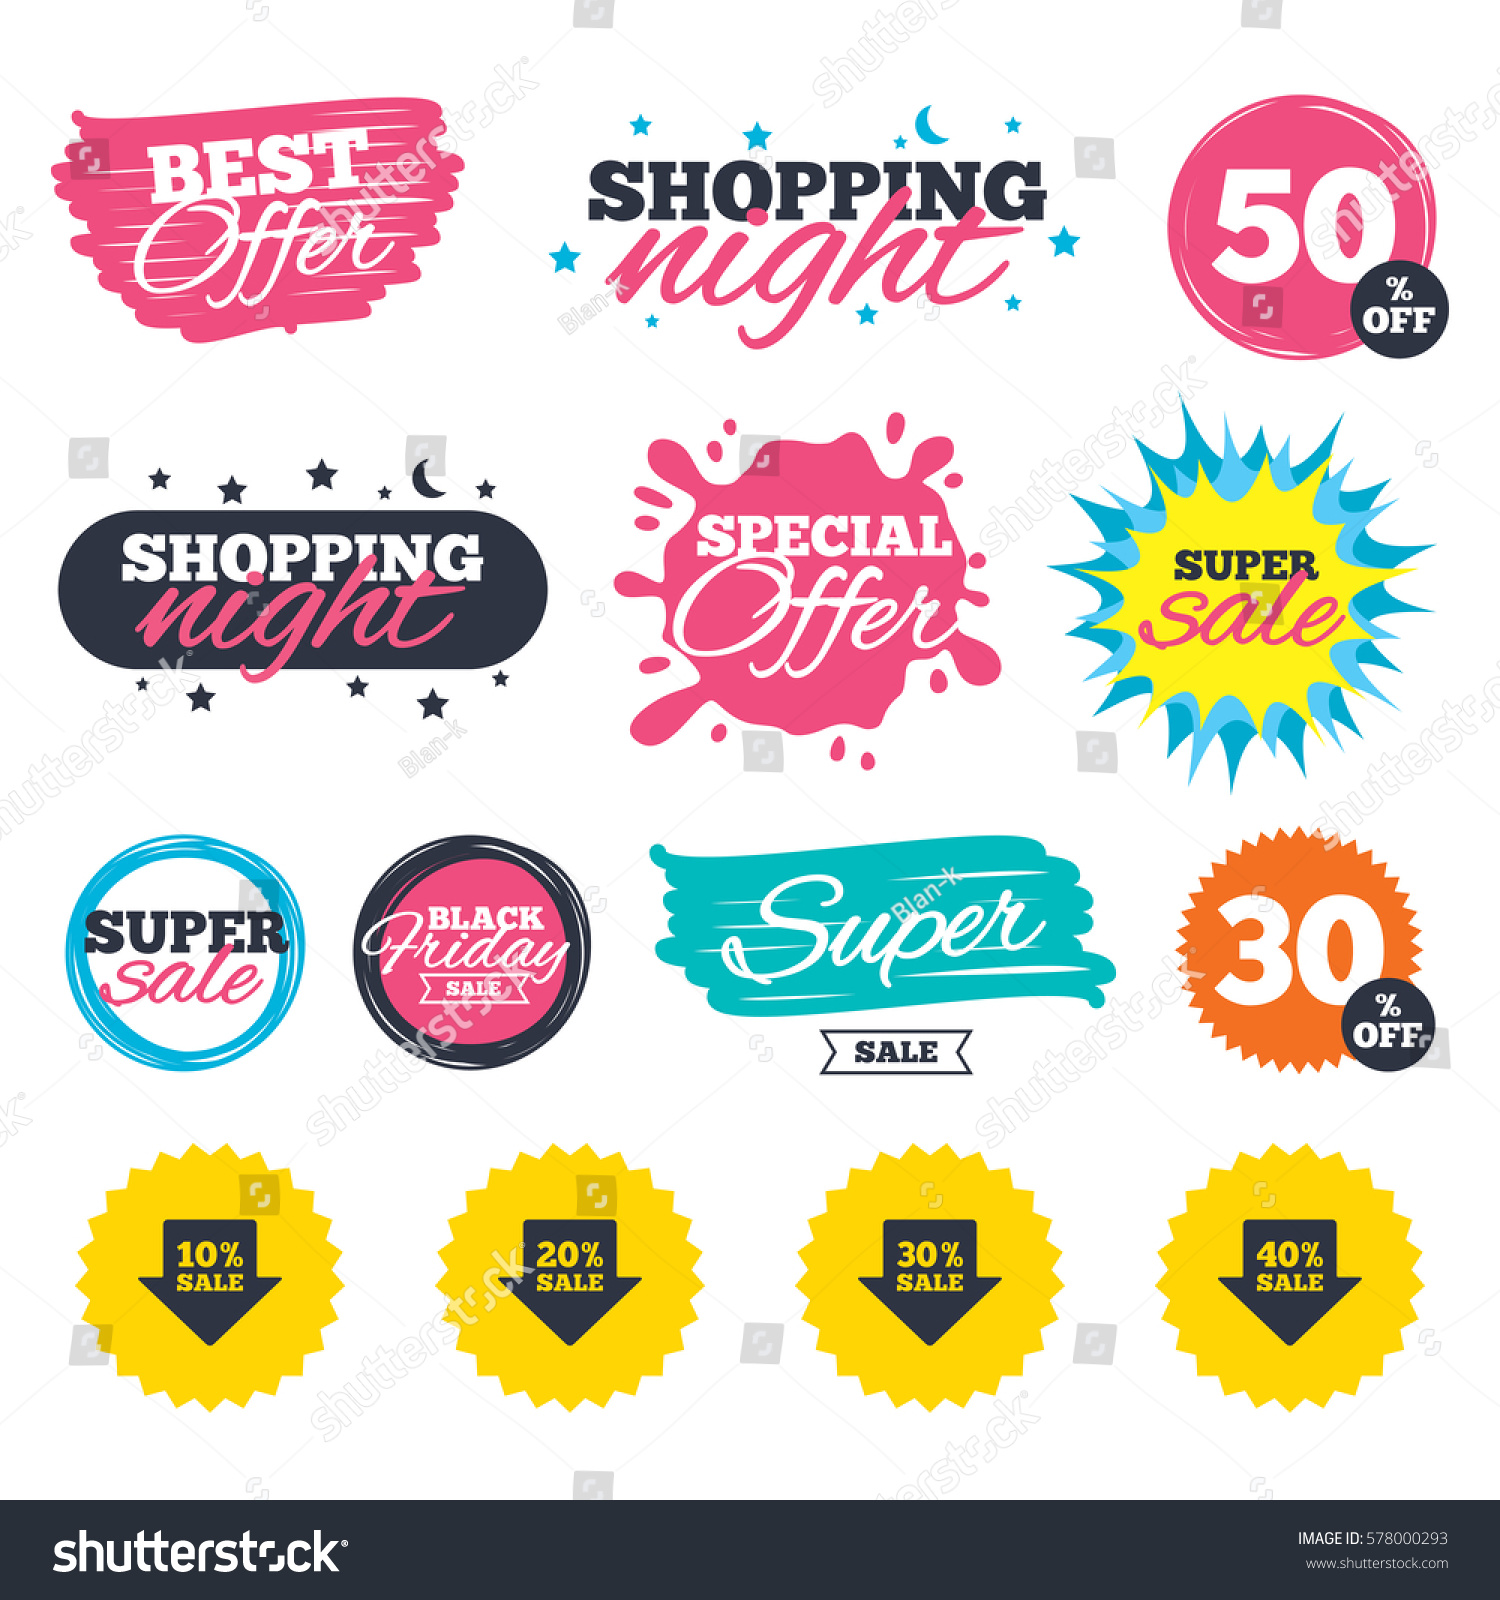 SVG of Sale shopping banners. Special offer splash. Sale arrow tag icons. Discount special offer symbols. 10%, 20%, 30% and 40% percent sale signs. Web badges and stickers. Best offer. Vector svg